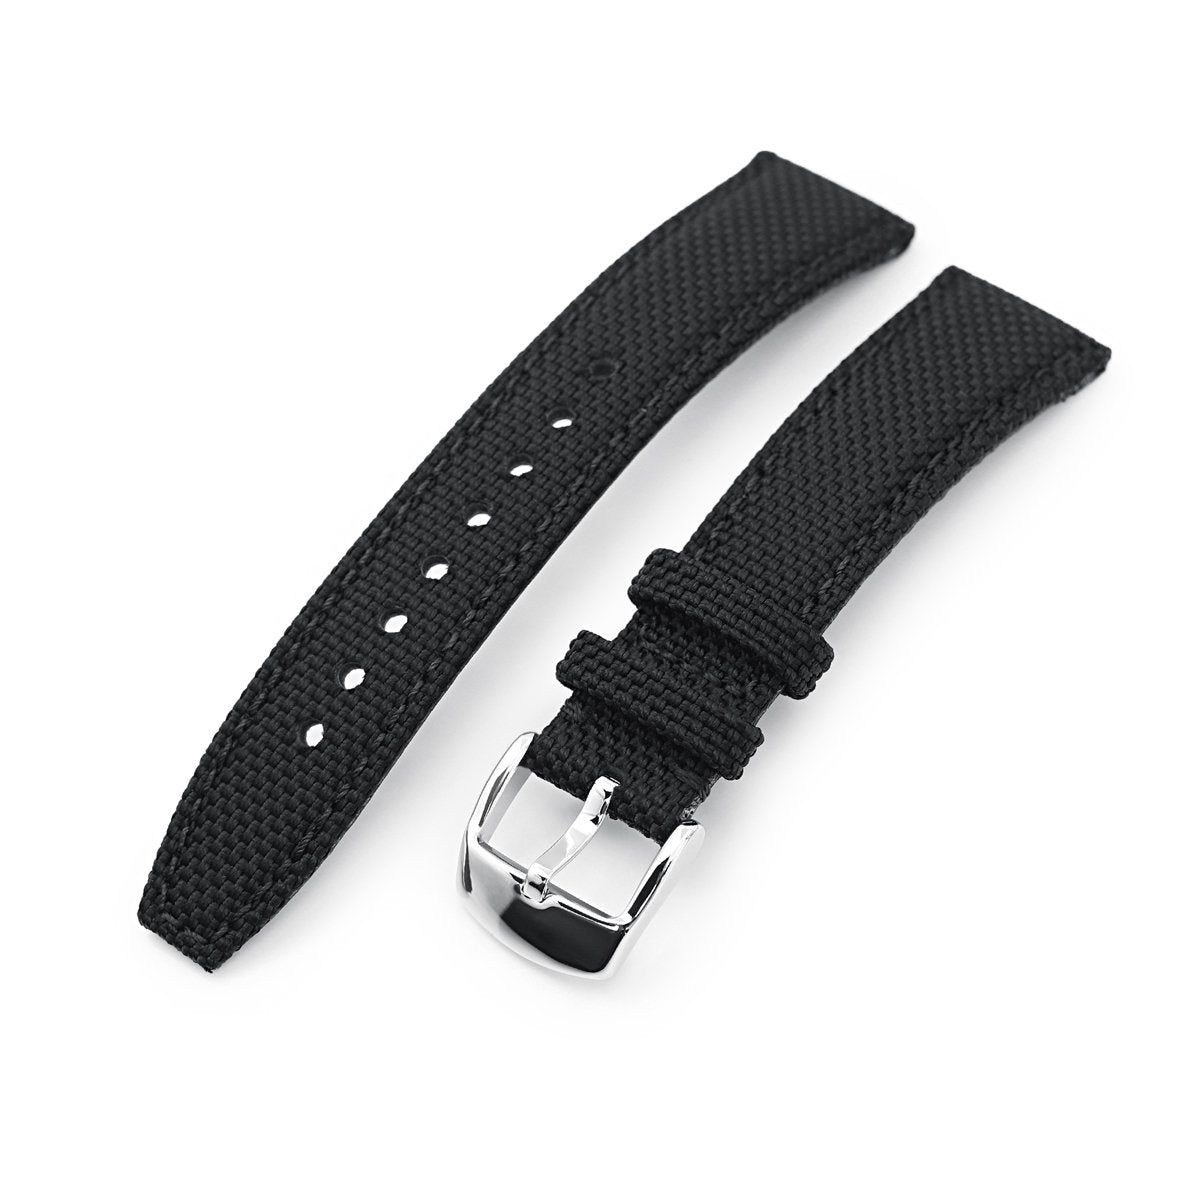 20mm 21mm or 22mm Strong Texture Woven Nylon Black Watch Strap Polished Strapcode Watch Bands